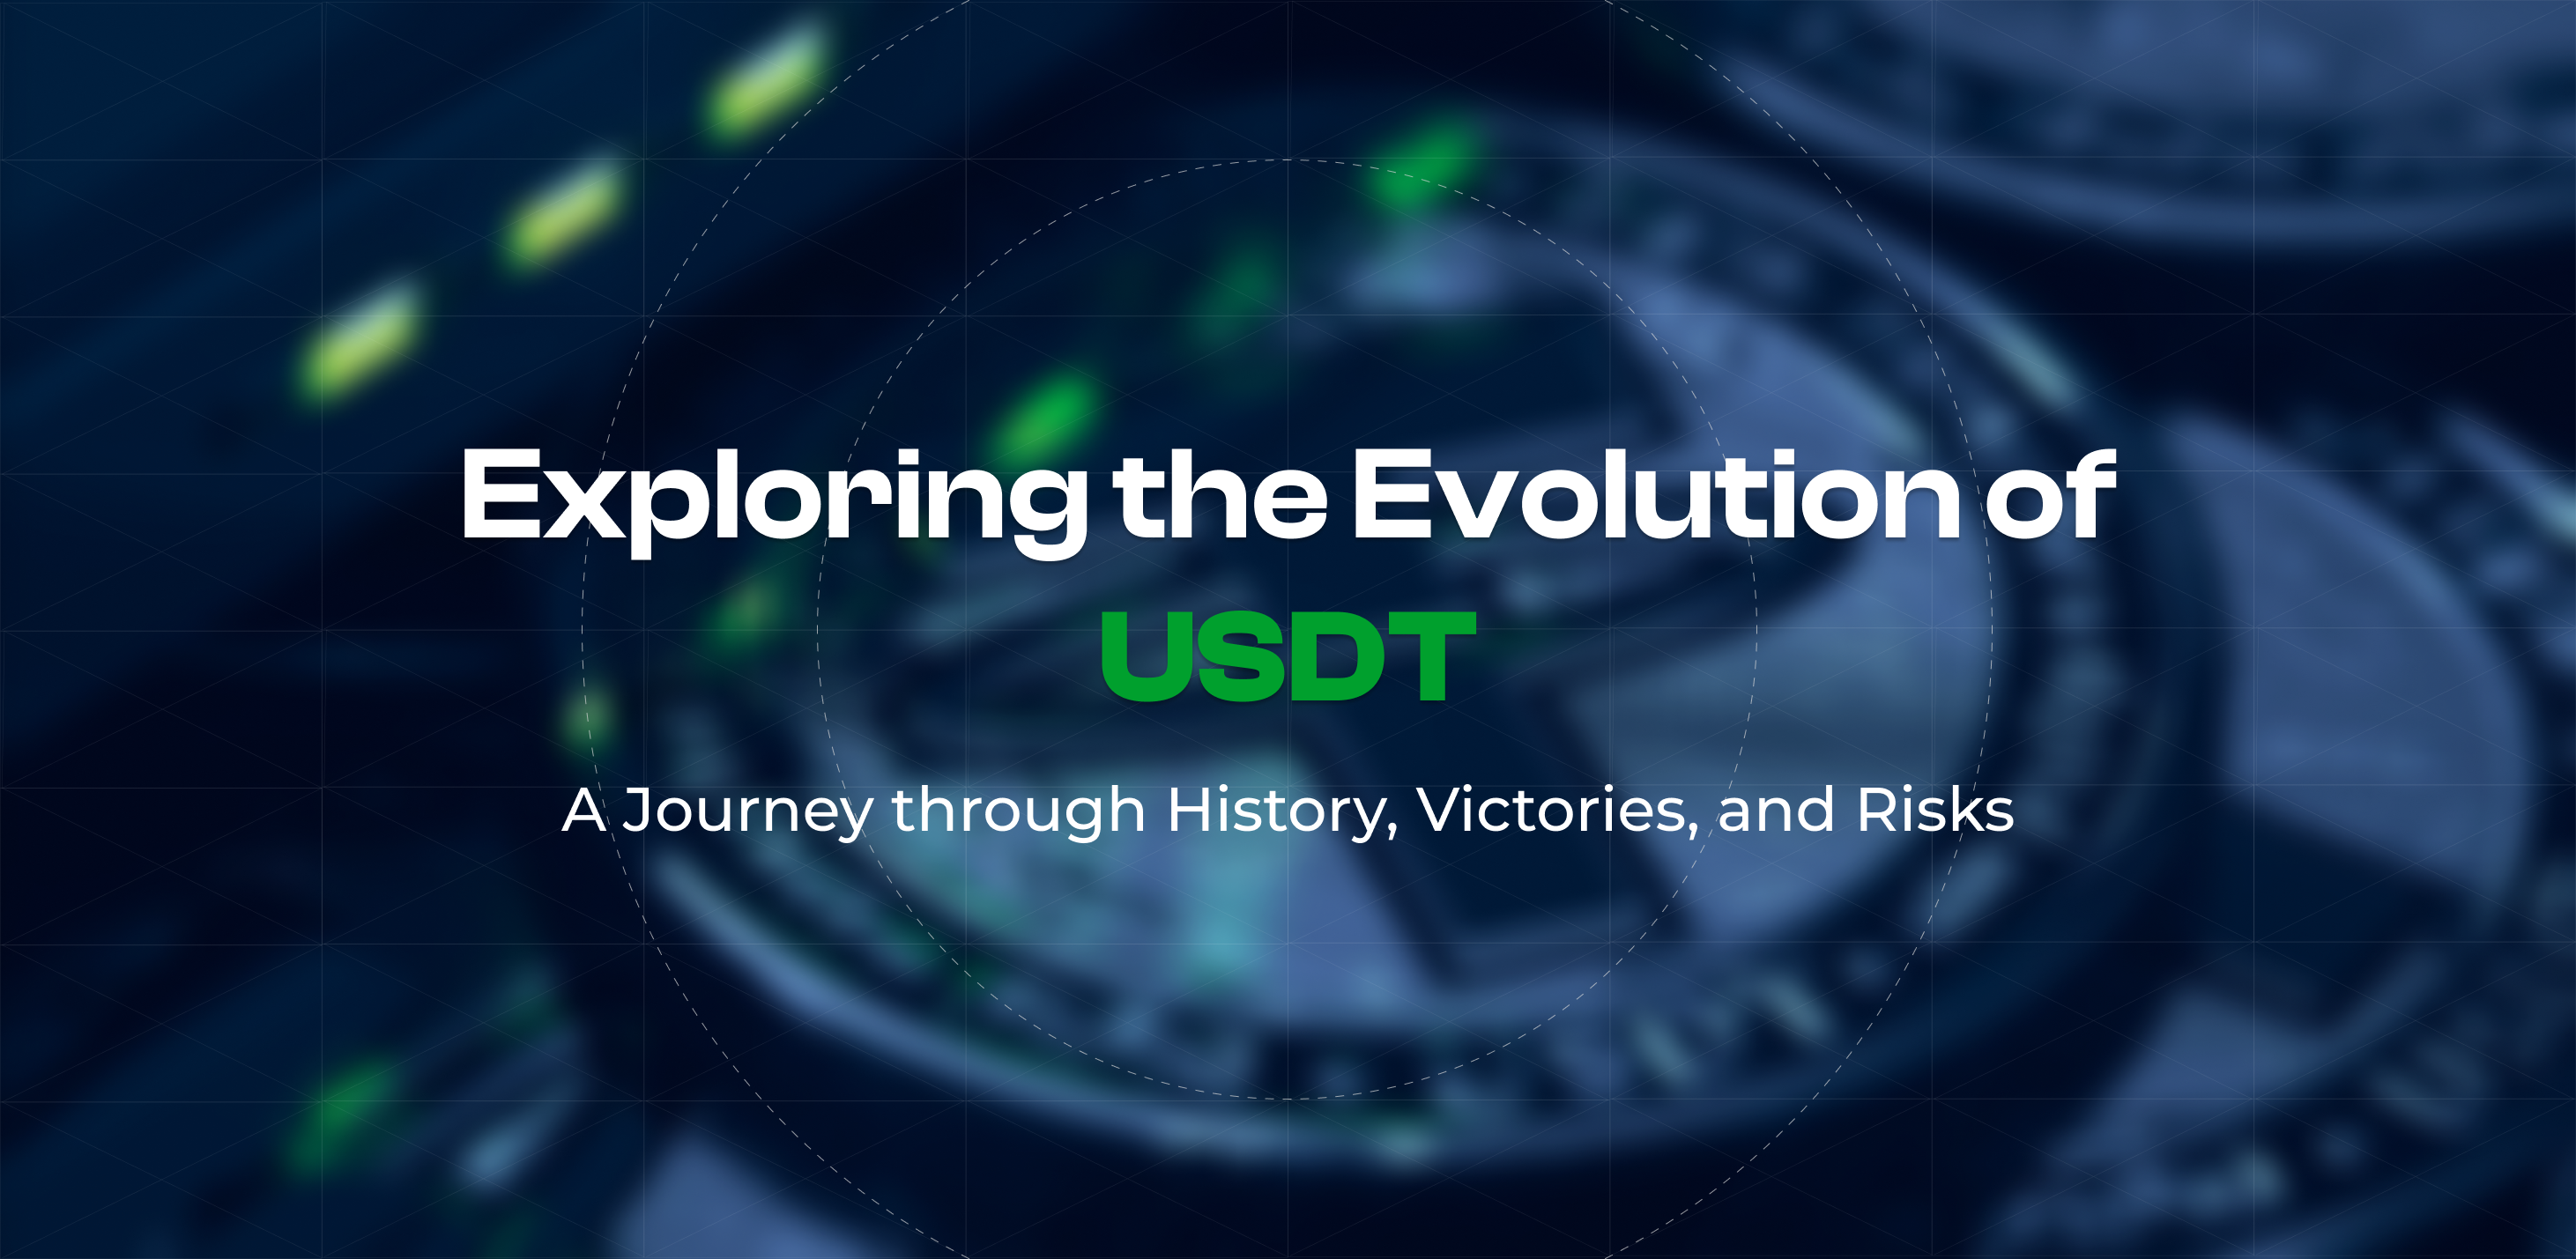 Exploring the Evolution of USDT: A Journey through History, Victories, and Risks